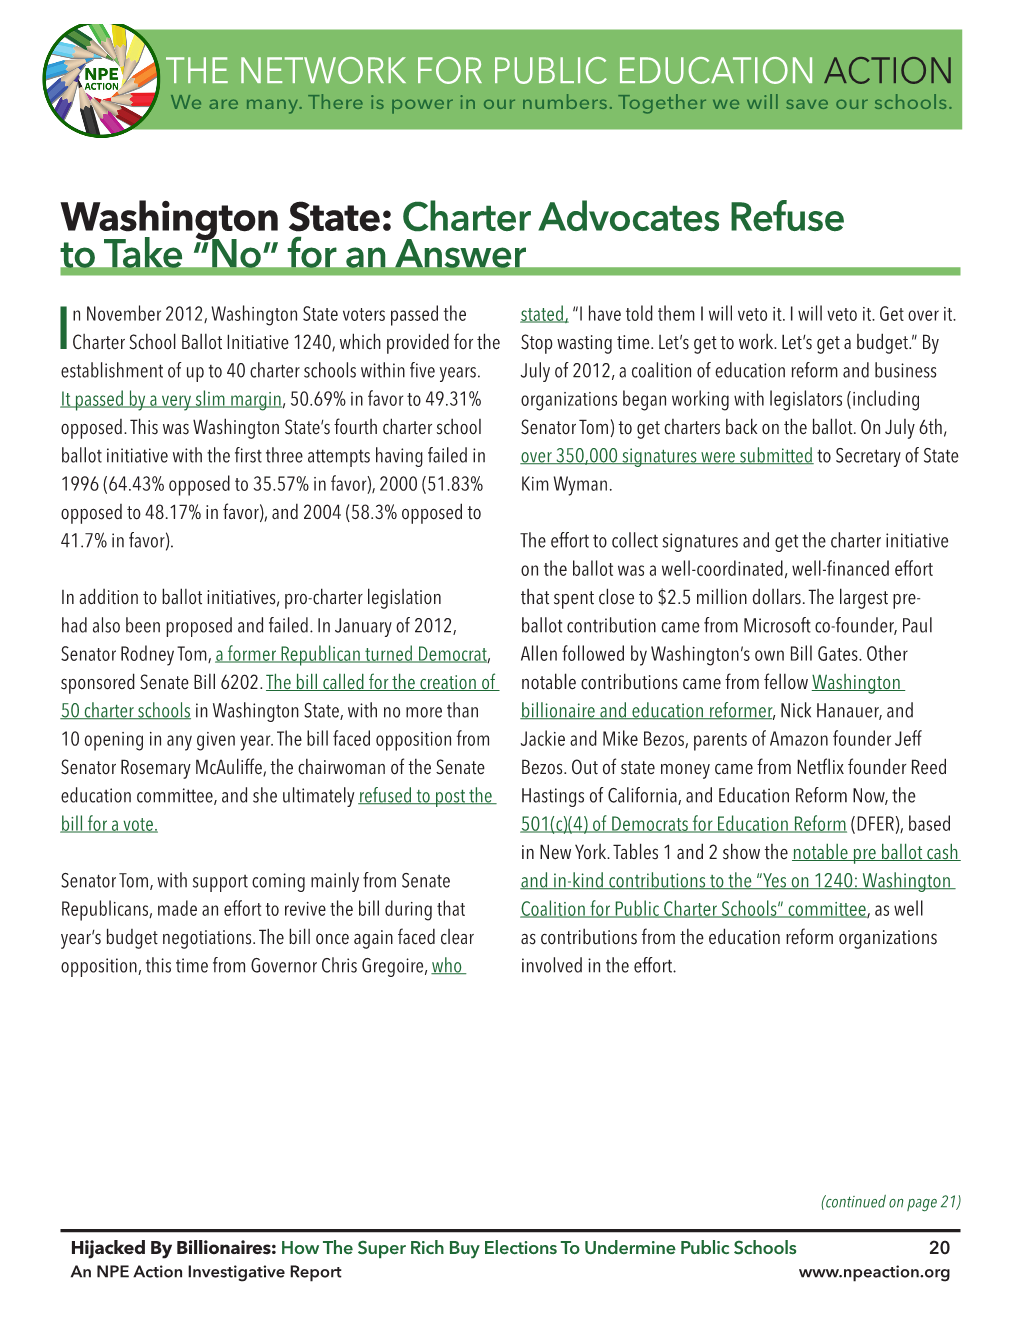 Washington State: Charter Advocates Refuse to Take “No” for an Answer